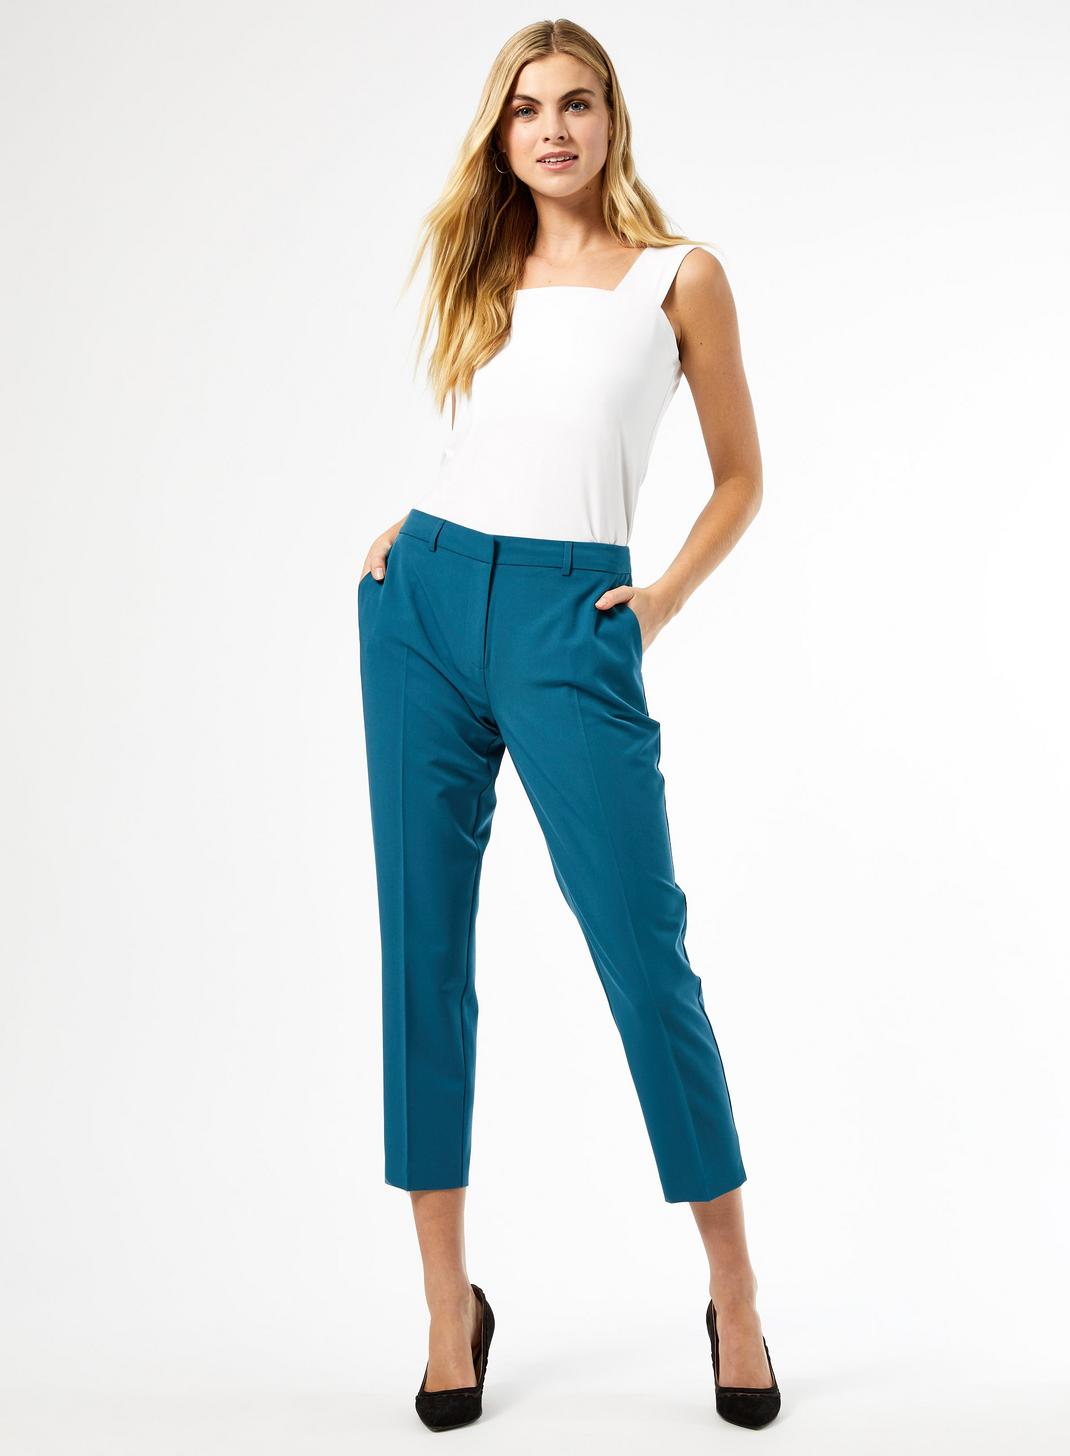 Teal Ankle Grazer Trousers | Dorothy Perkins EU